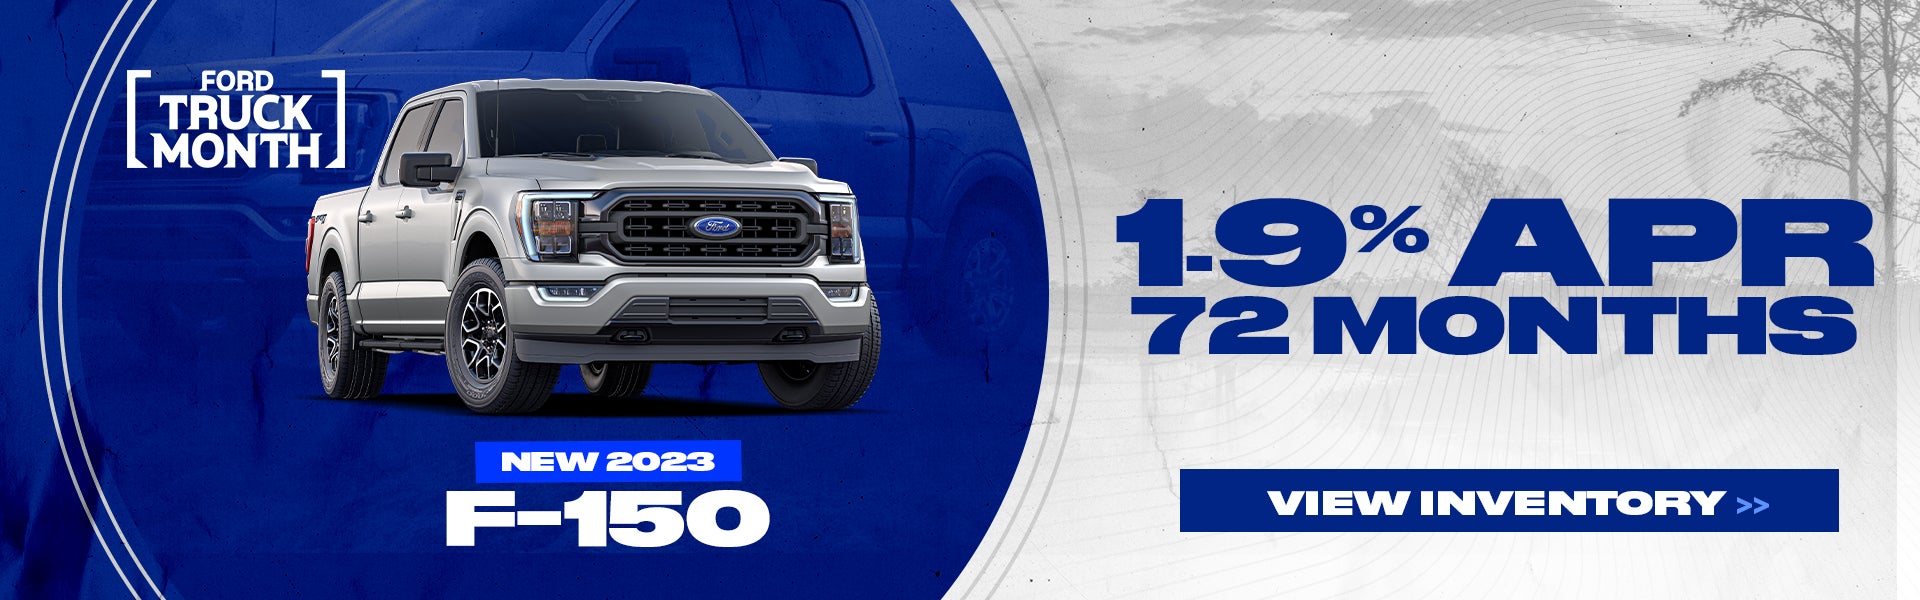 1.9% APR for 72 Months on New 2023 F-150